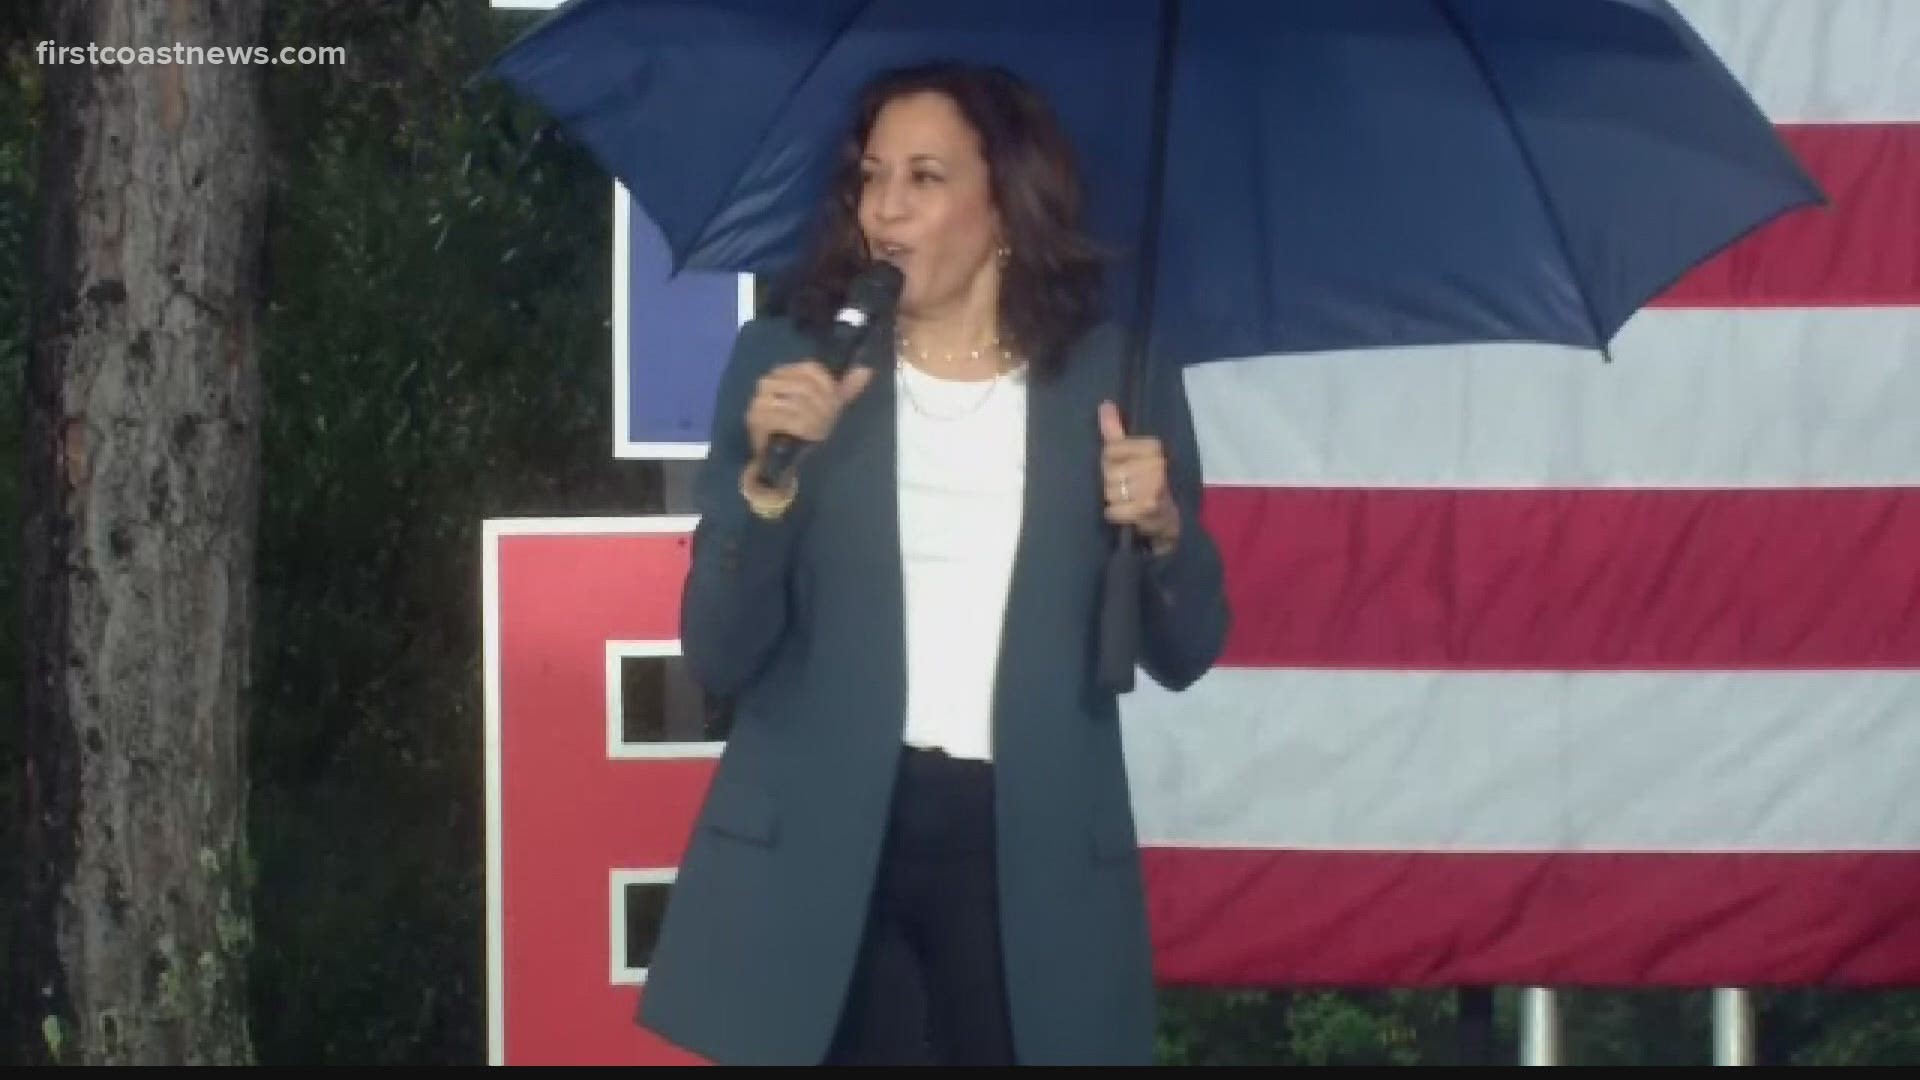 VP candidate Kamala Harris visited Jacksonville during a campaign event.